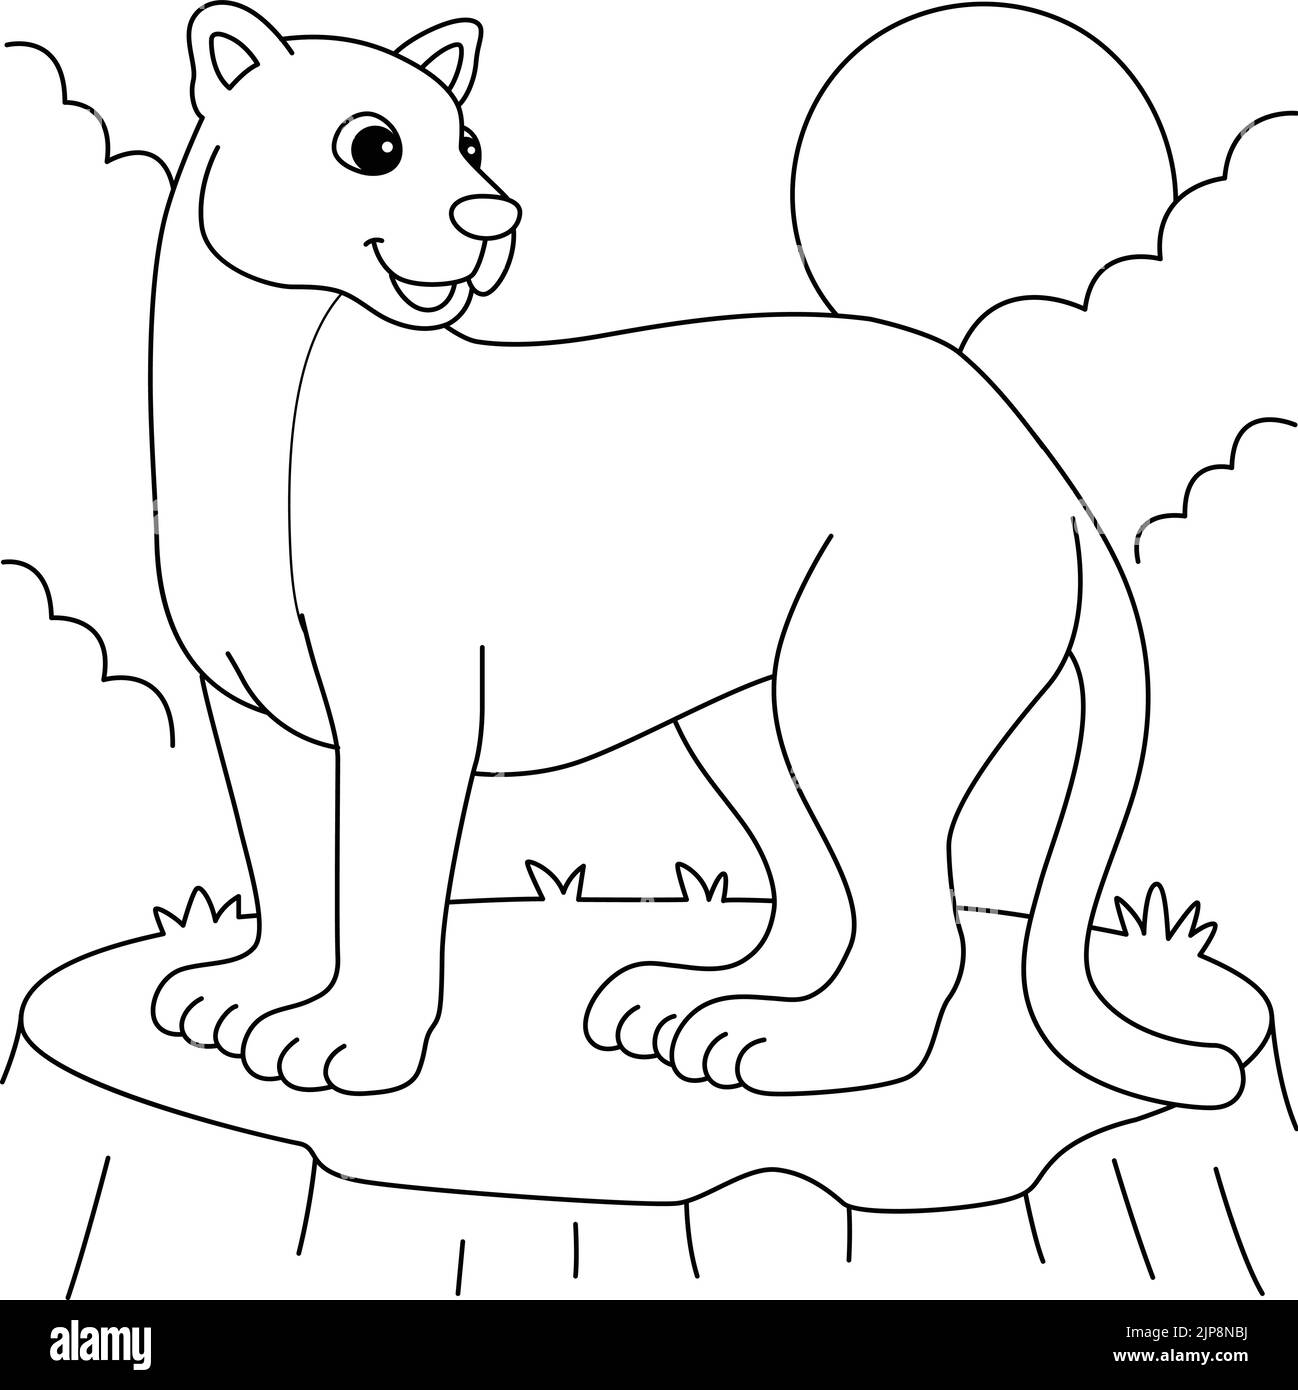 Puma Animal Coloring Page for Kids Stock Vector